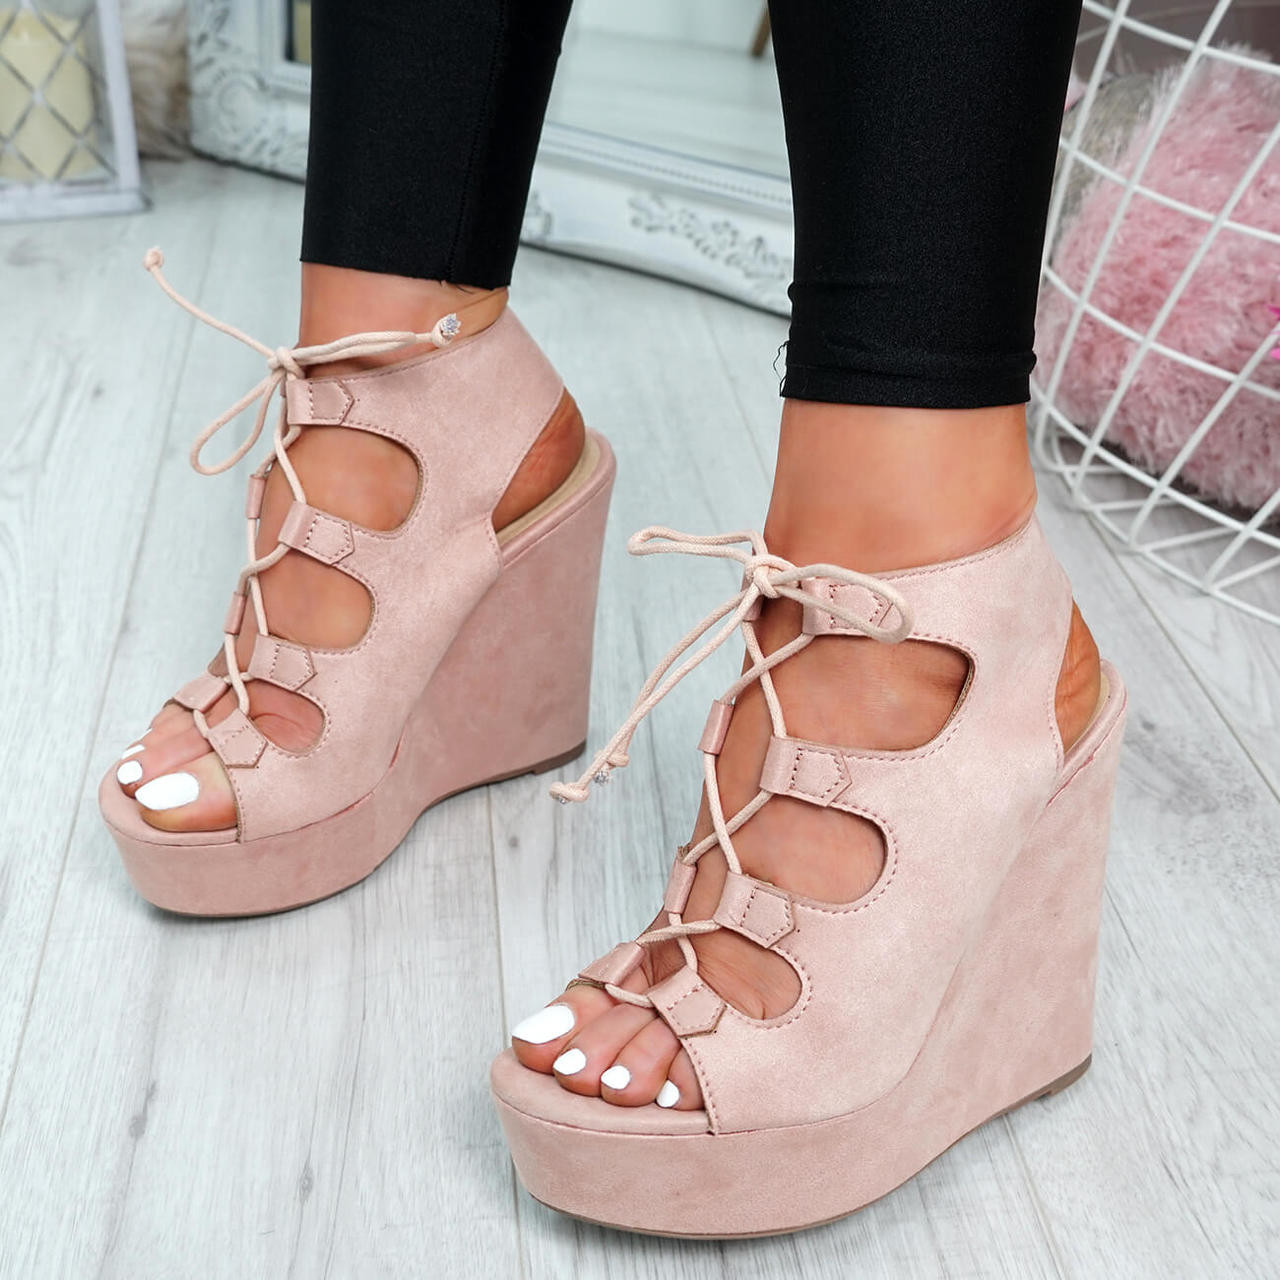 pink wedge shoes uk